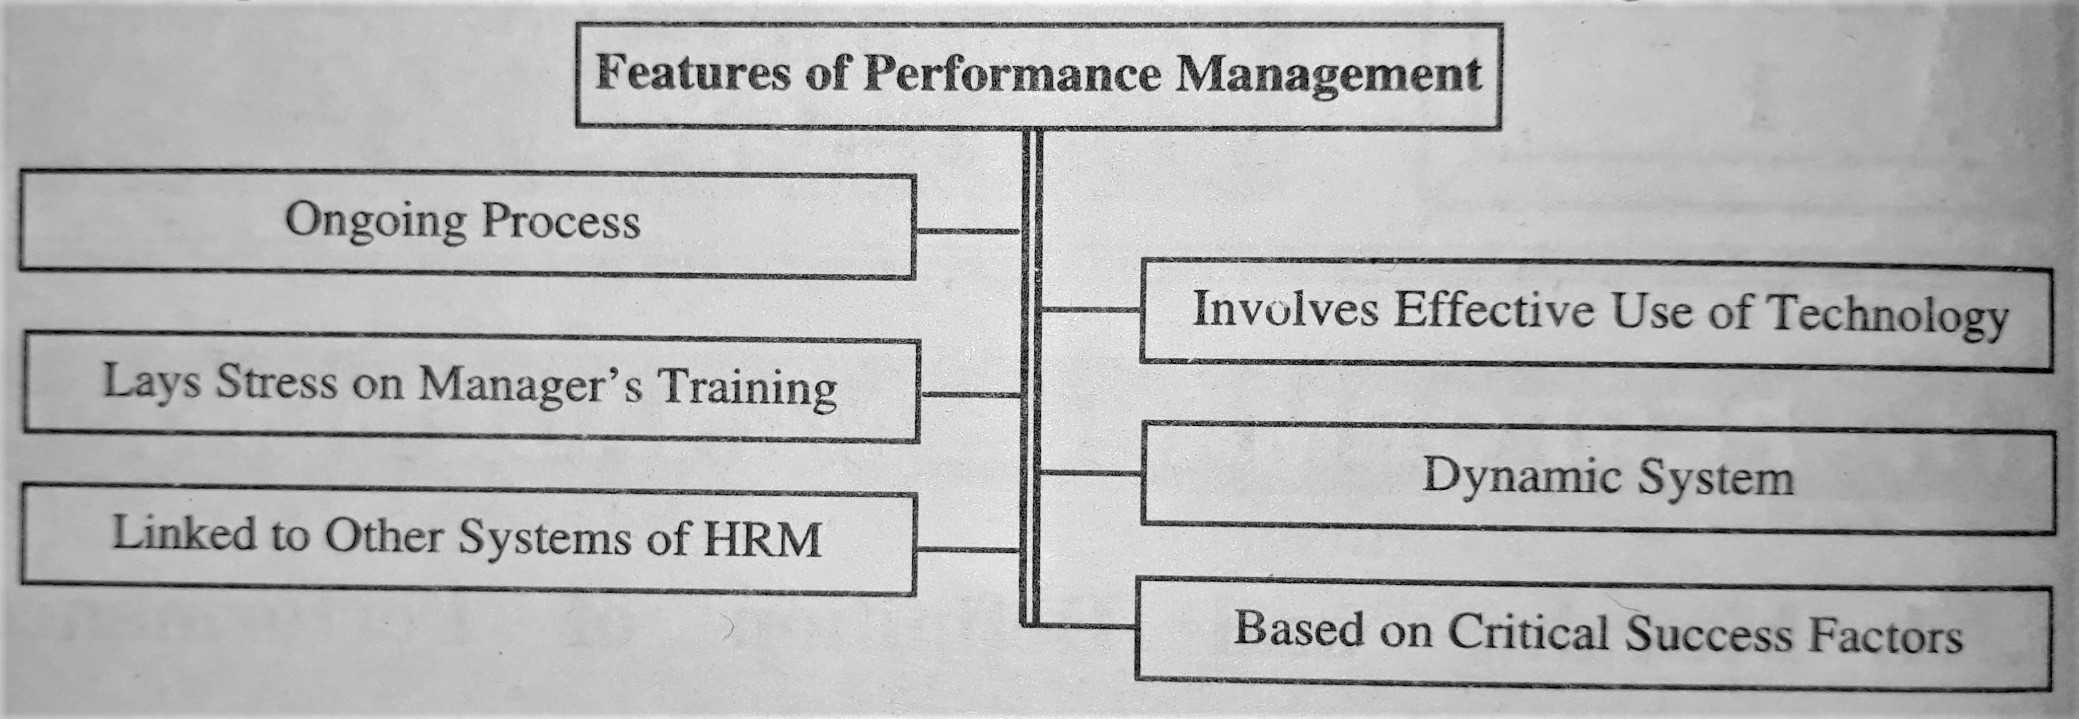 Features of Performance Management